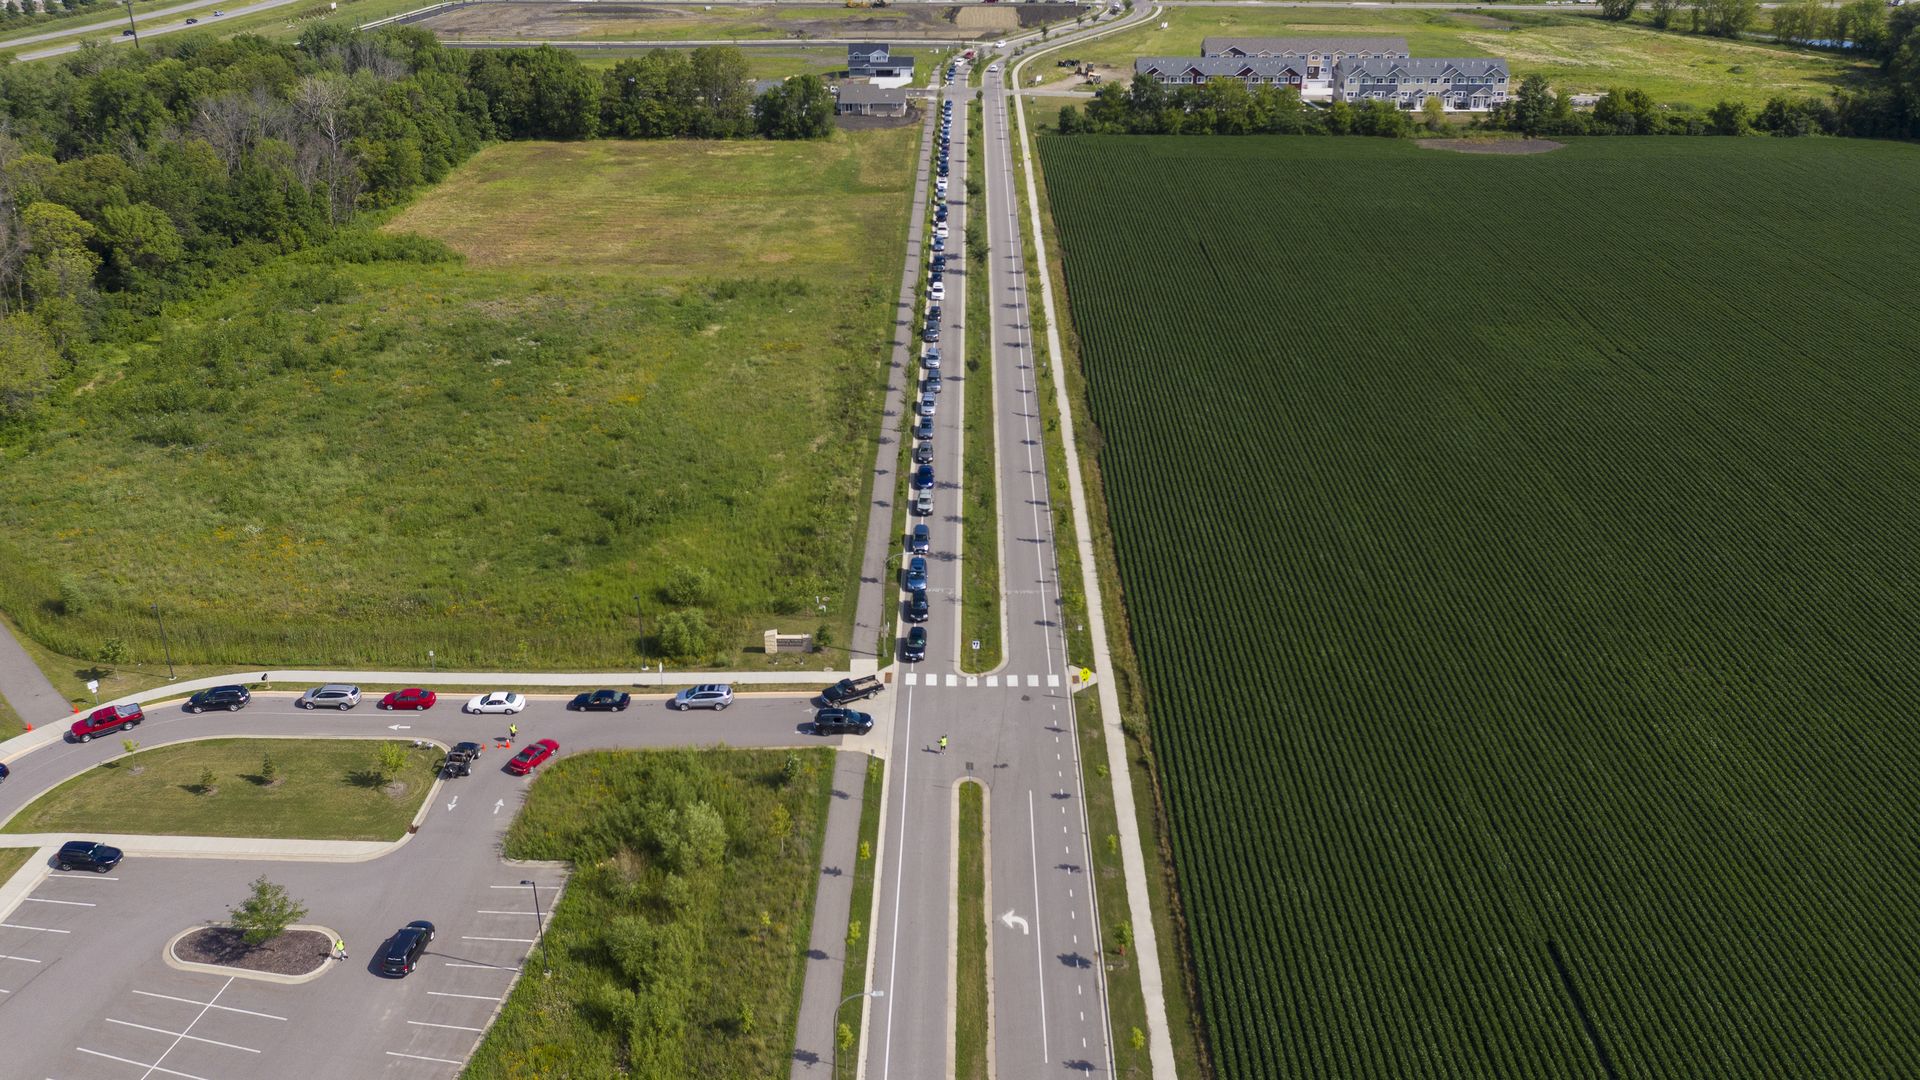 Drivers lined up for a pop-up grocery event in Mankato, Minnesota, in July 2020.